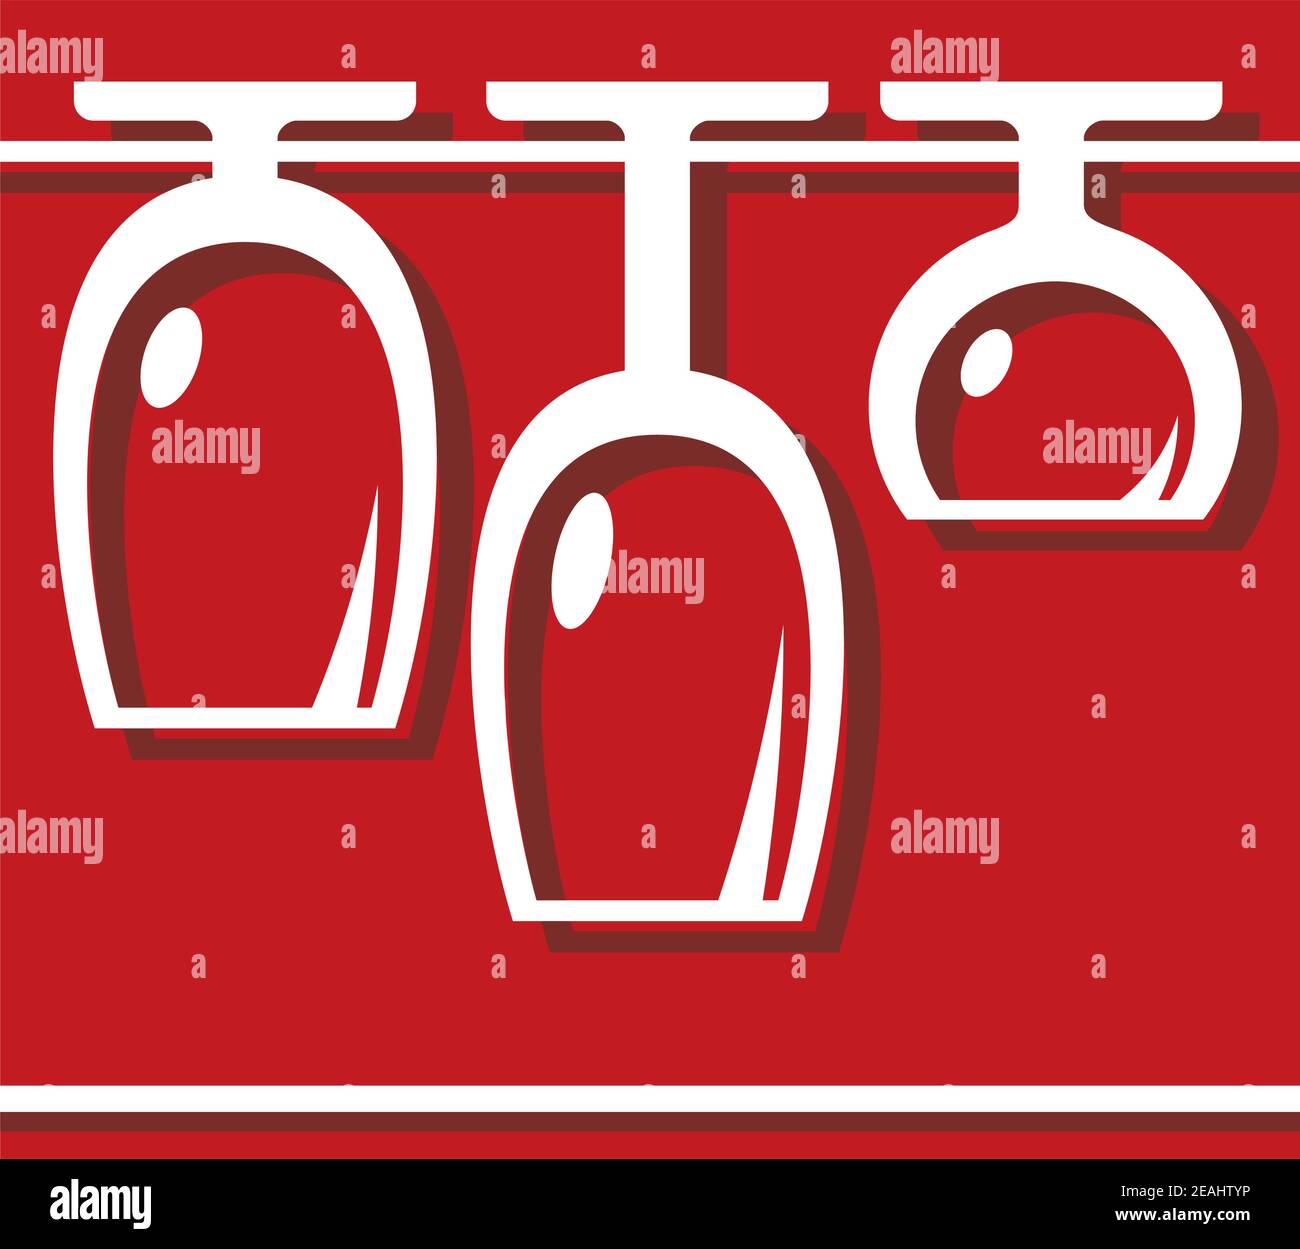 Pub or bar icon with the clean glasses hanging drying in a rack ready to serve customers, vector outline illustration on red Stock Vector